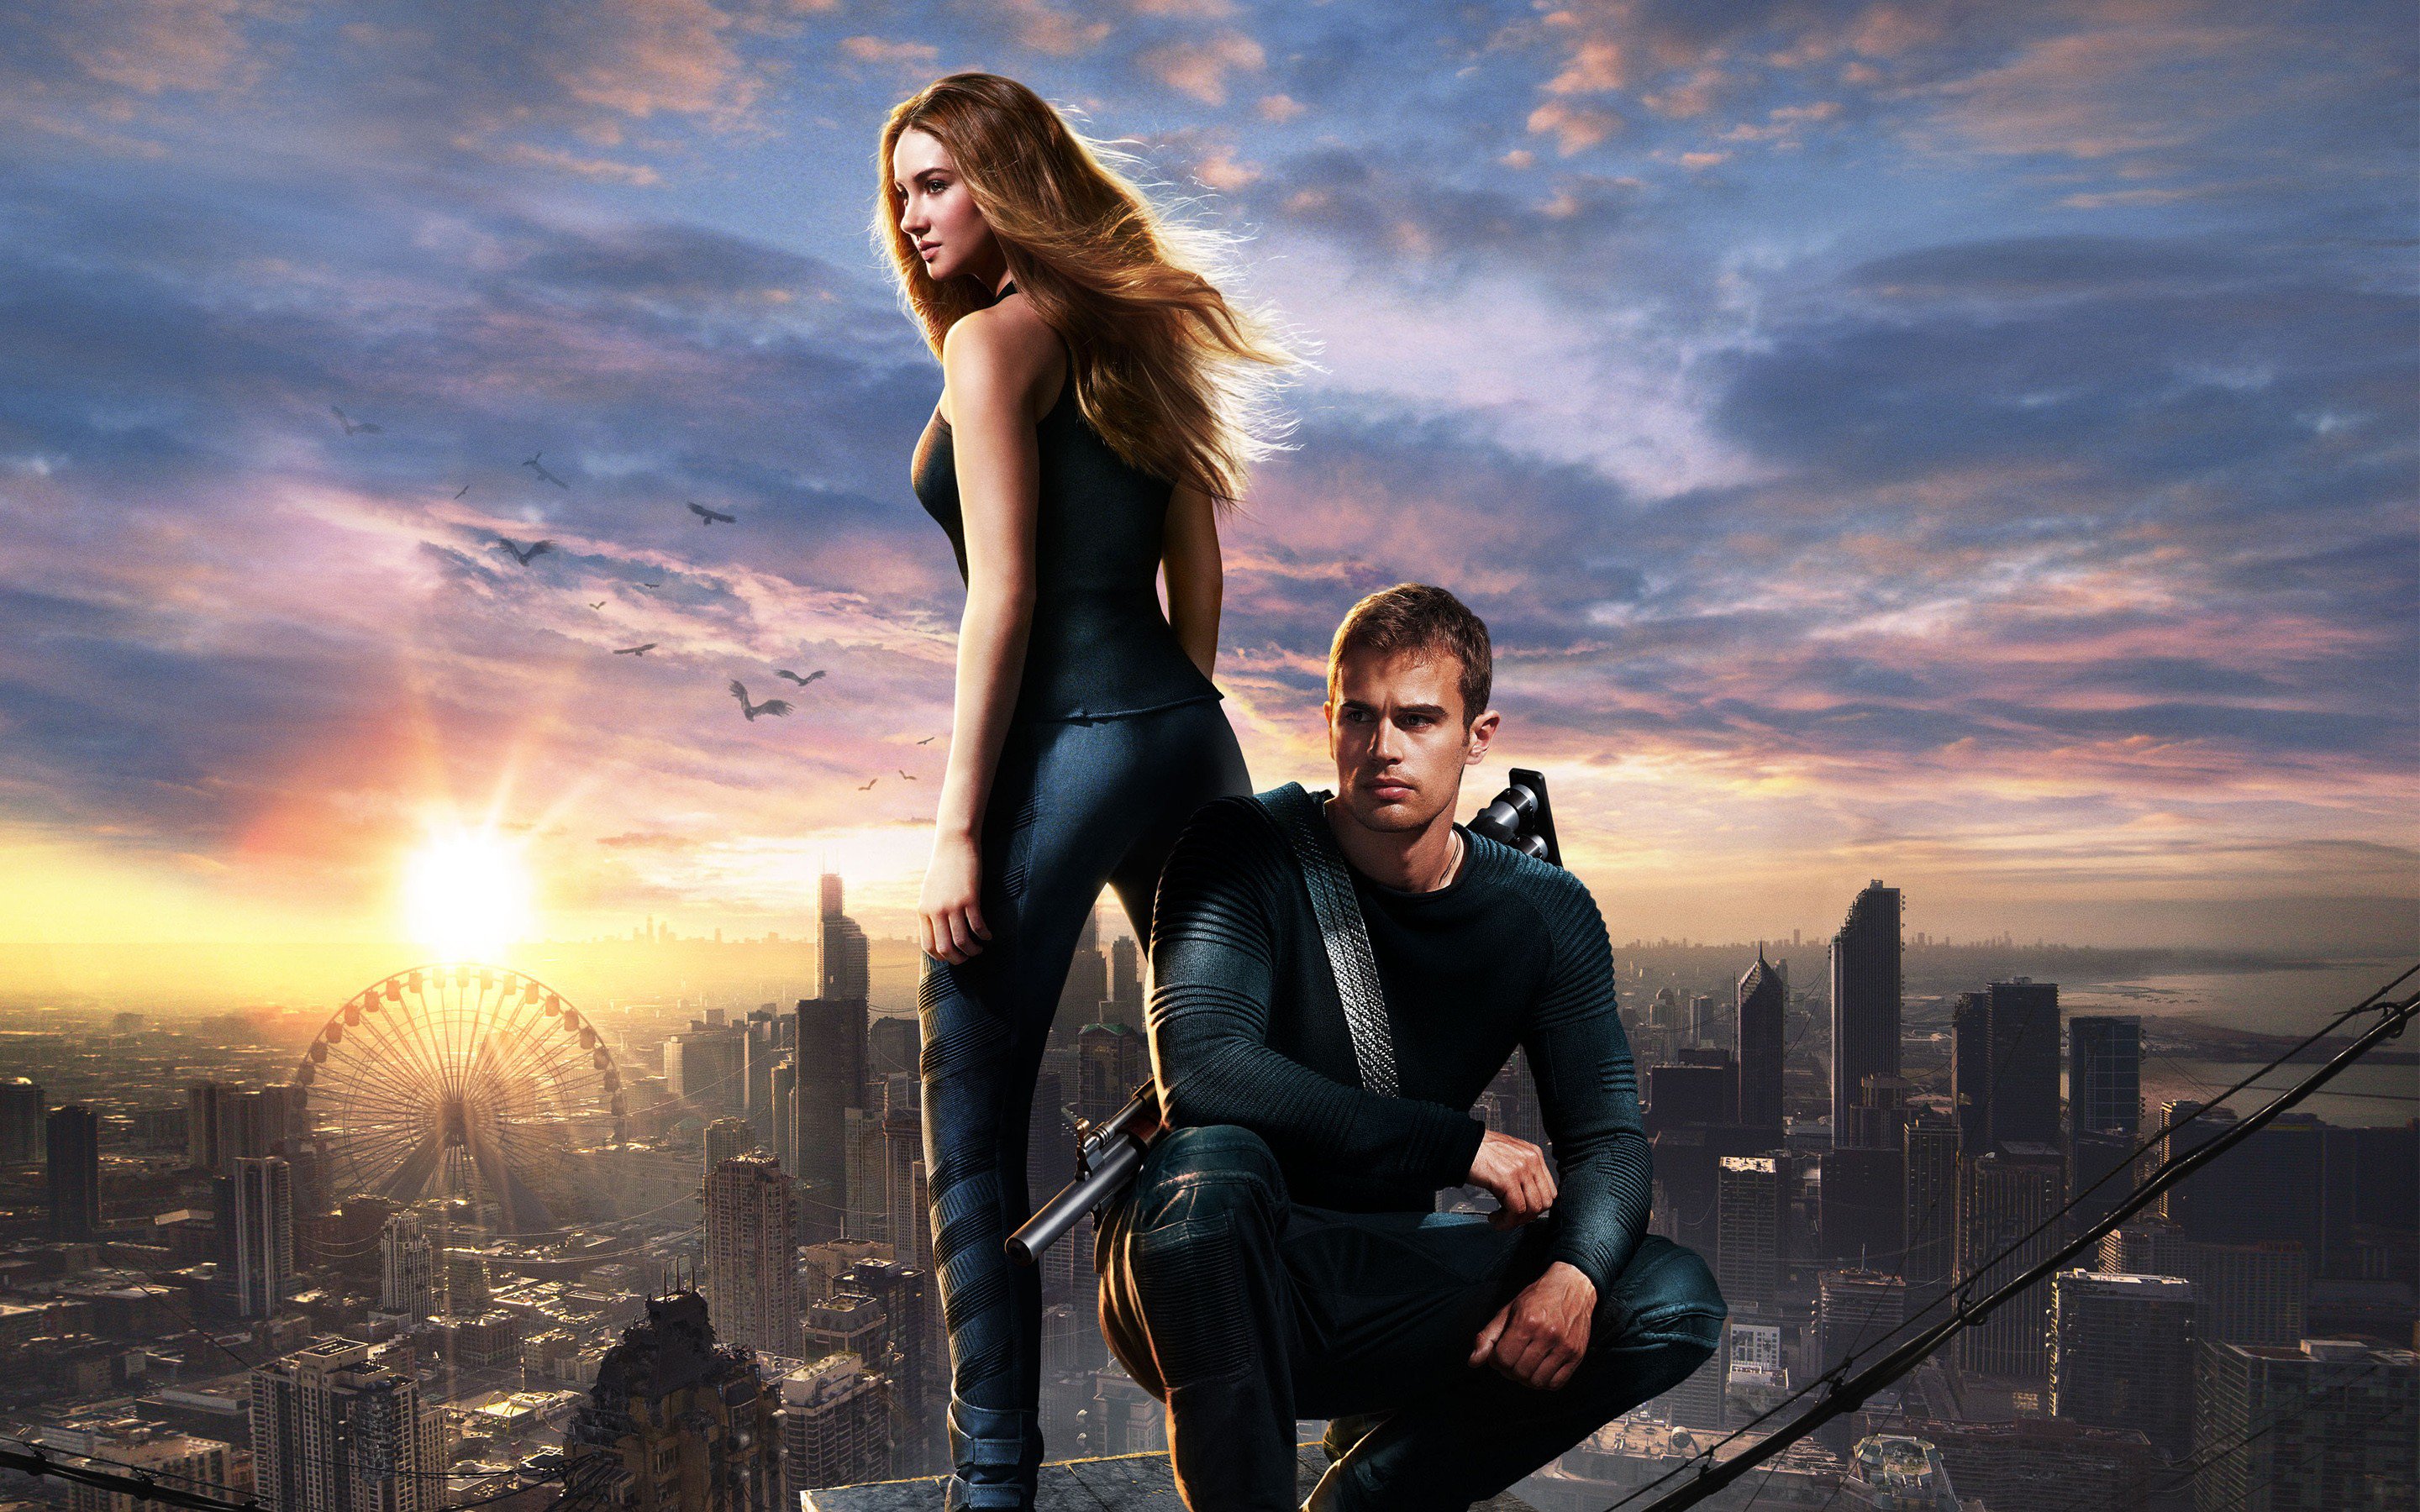 divergent-movie-hd-movies-4k-wallpapers-images-backgrounds-photos-and-pictures